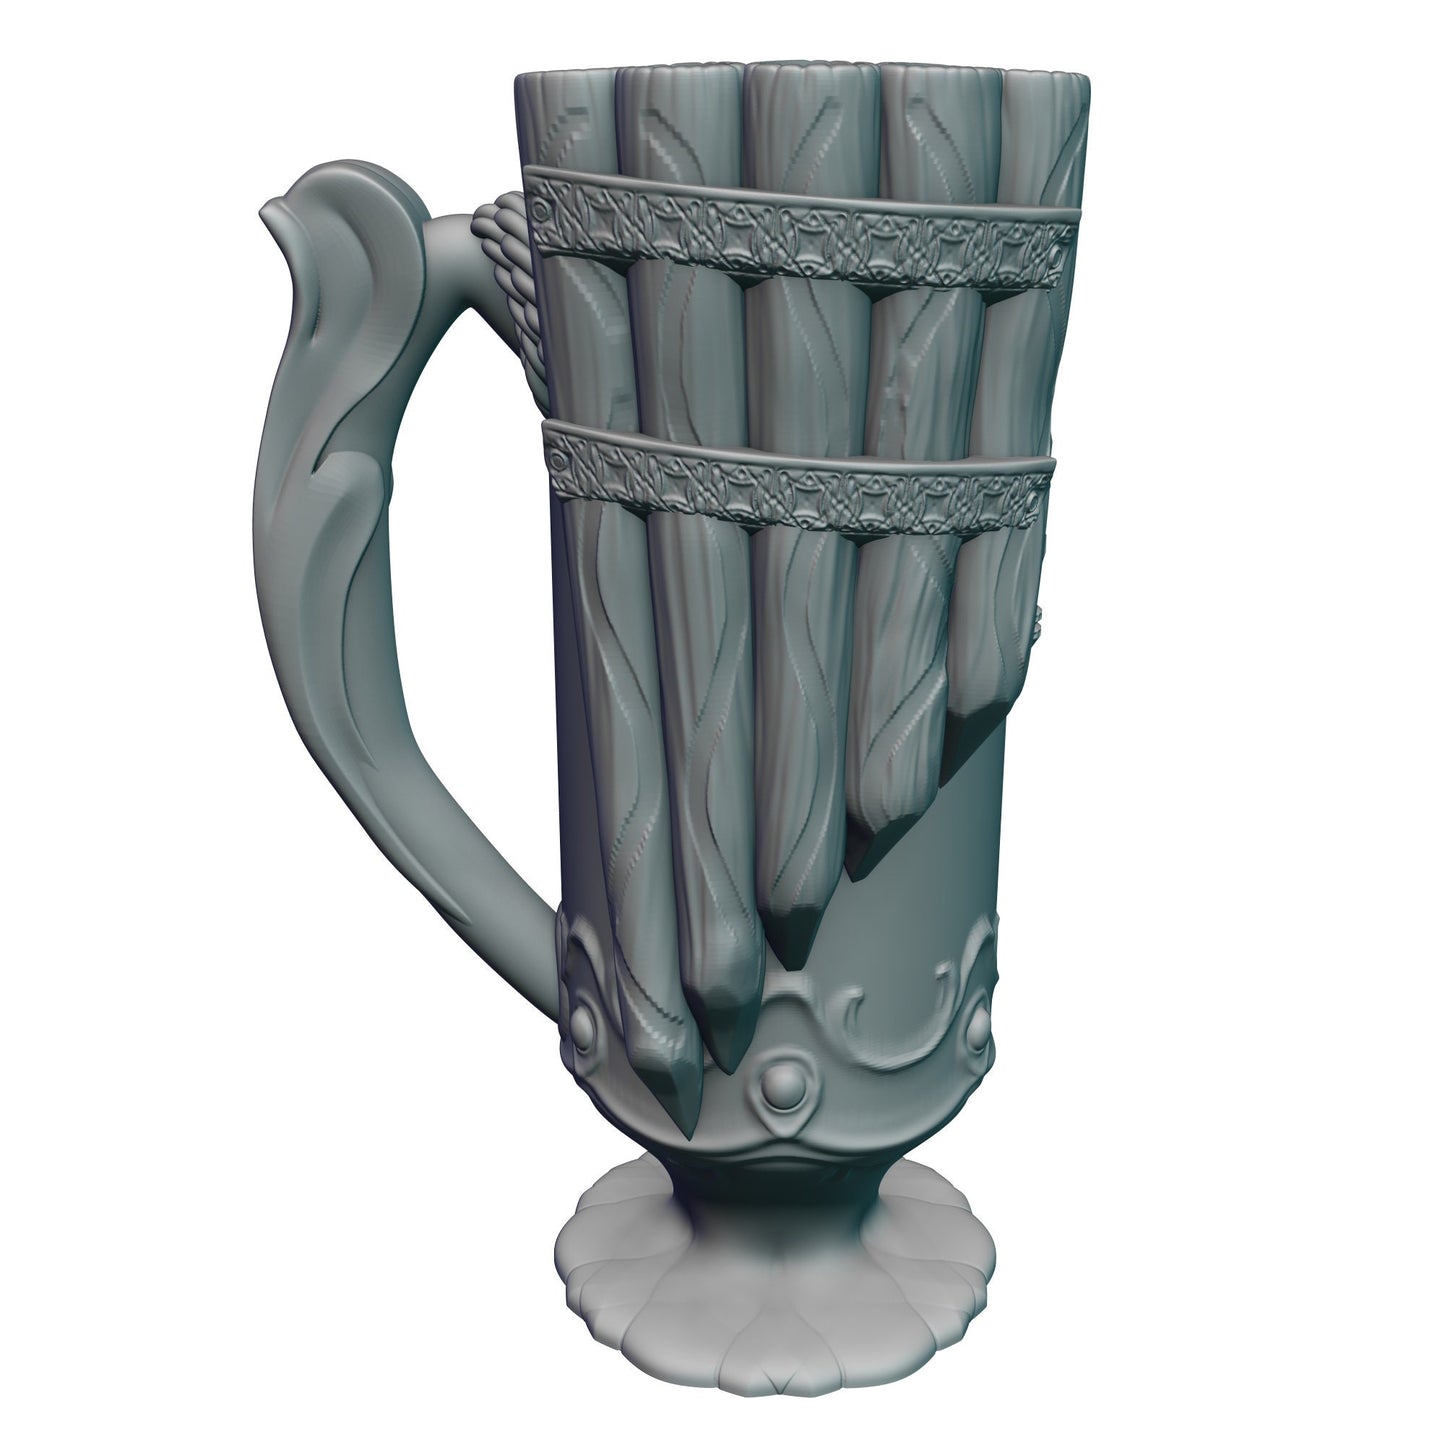 Bard Class 3D Printed Mythic Mug Stein | Tabletop RPG Gaming Cosplay - Dungeons and Dragon DnD D&D Wargaming | Drink Koozie Can Holder.